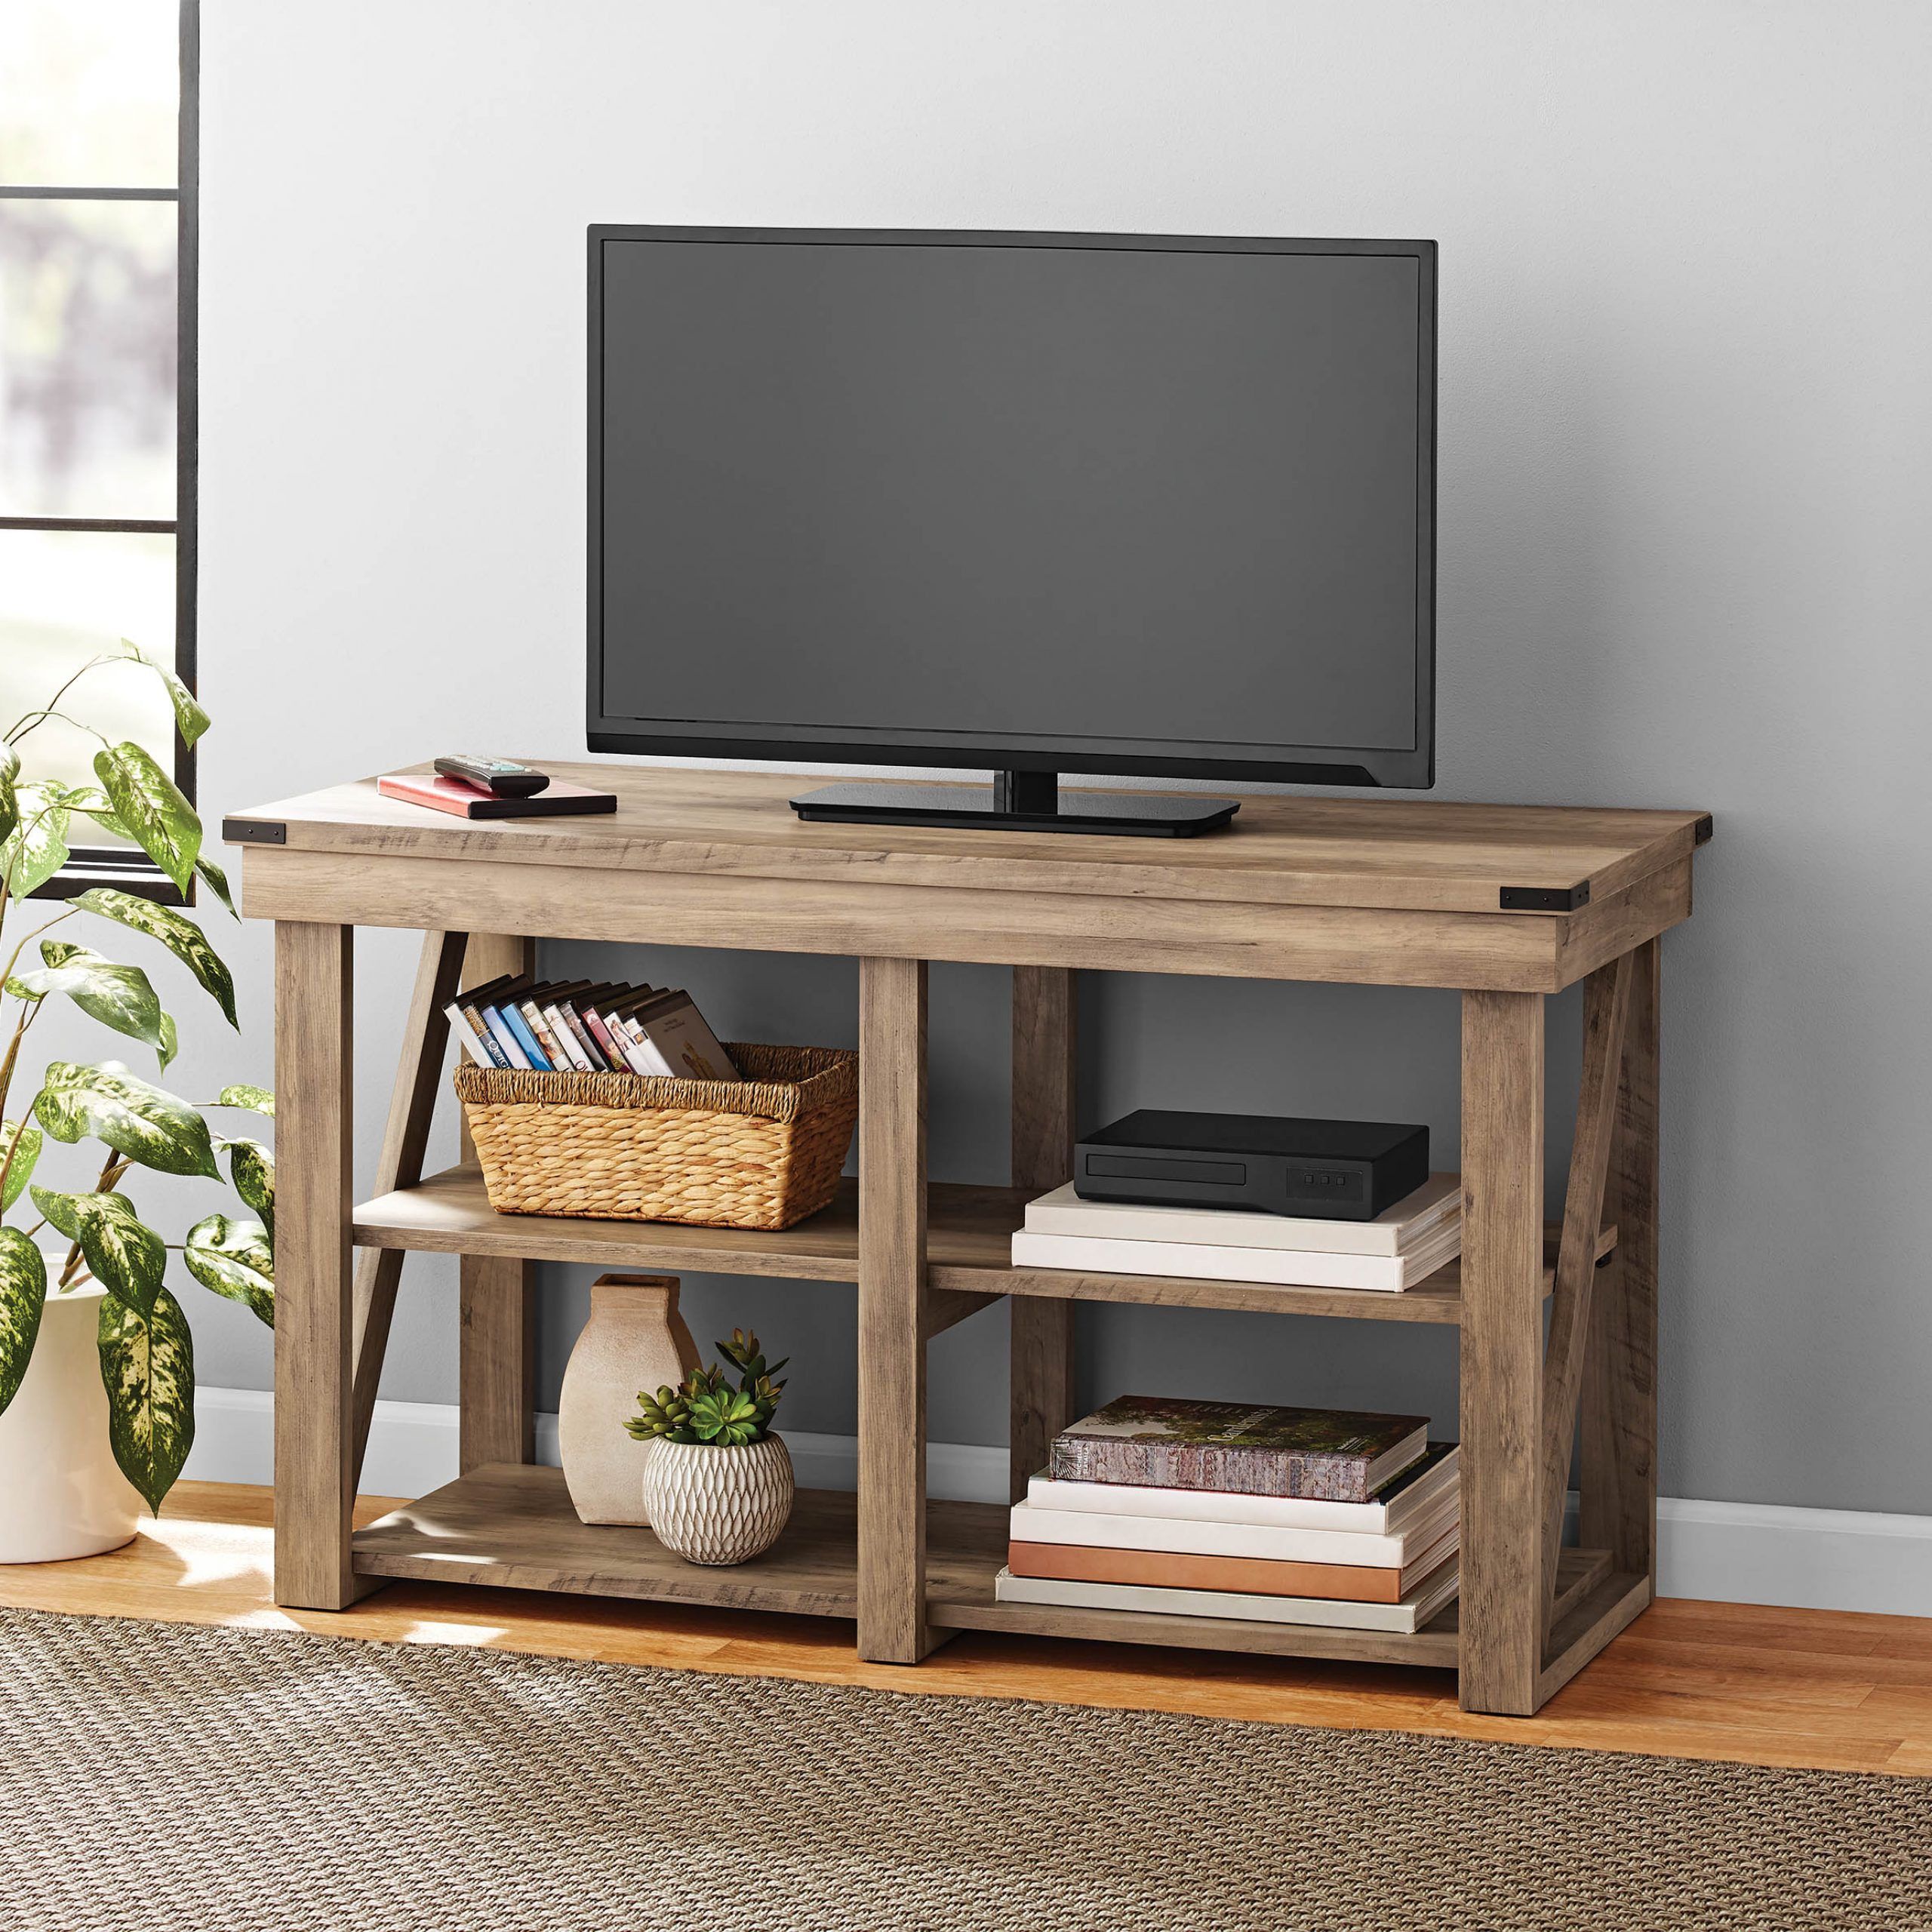 Mainstays Lawson Tv Stand For Tvs Up To 55", Rustic Oak For Sahika Tv Stands For Tvs Up To 55&quot; (View 2 of 15)